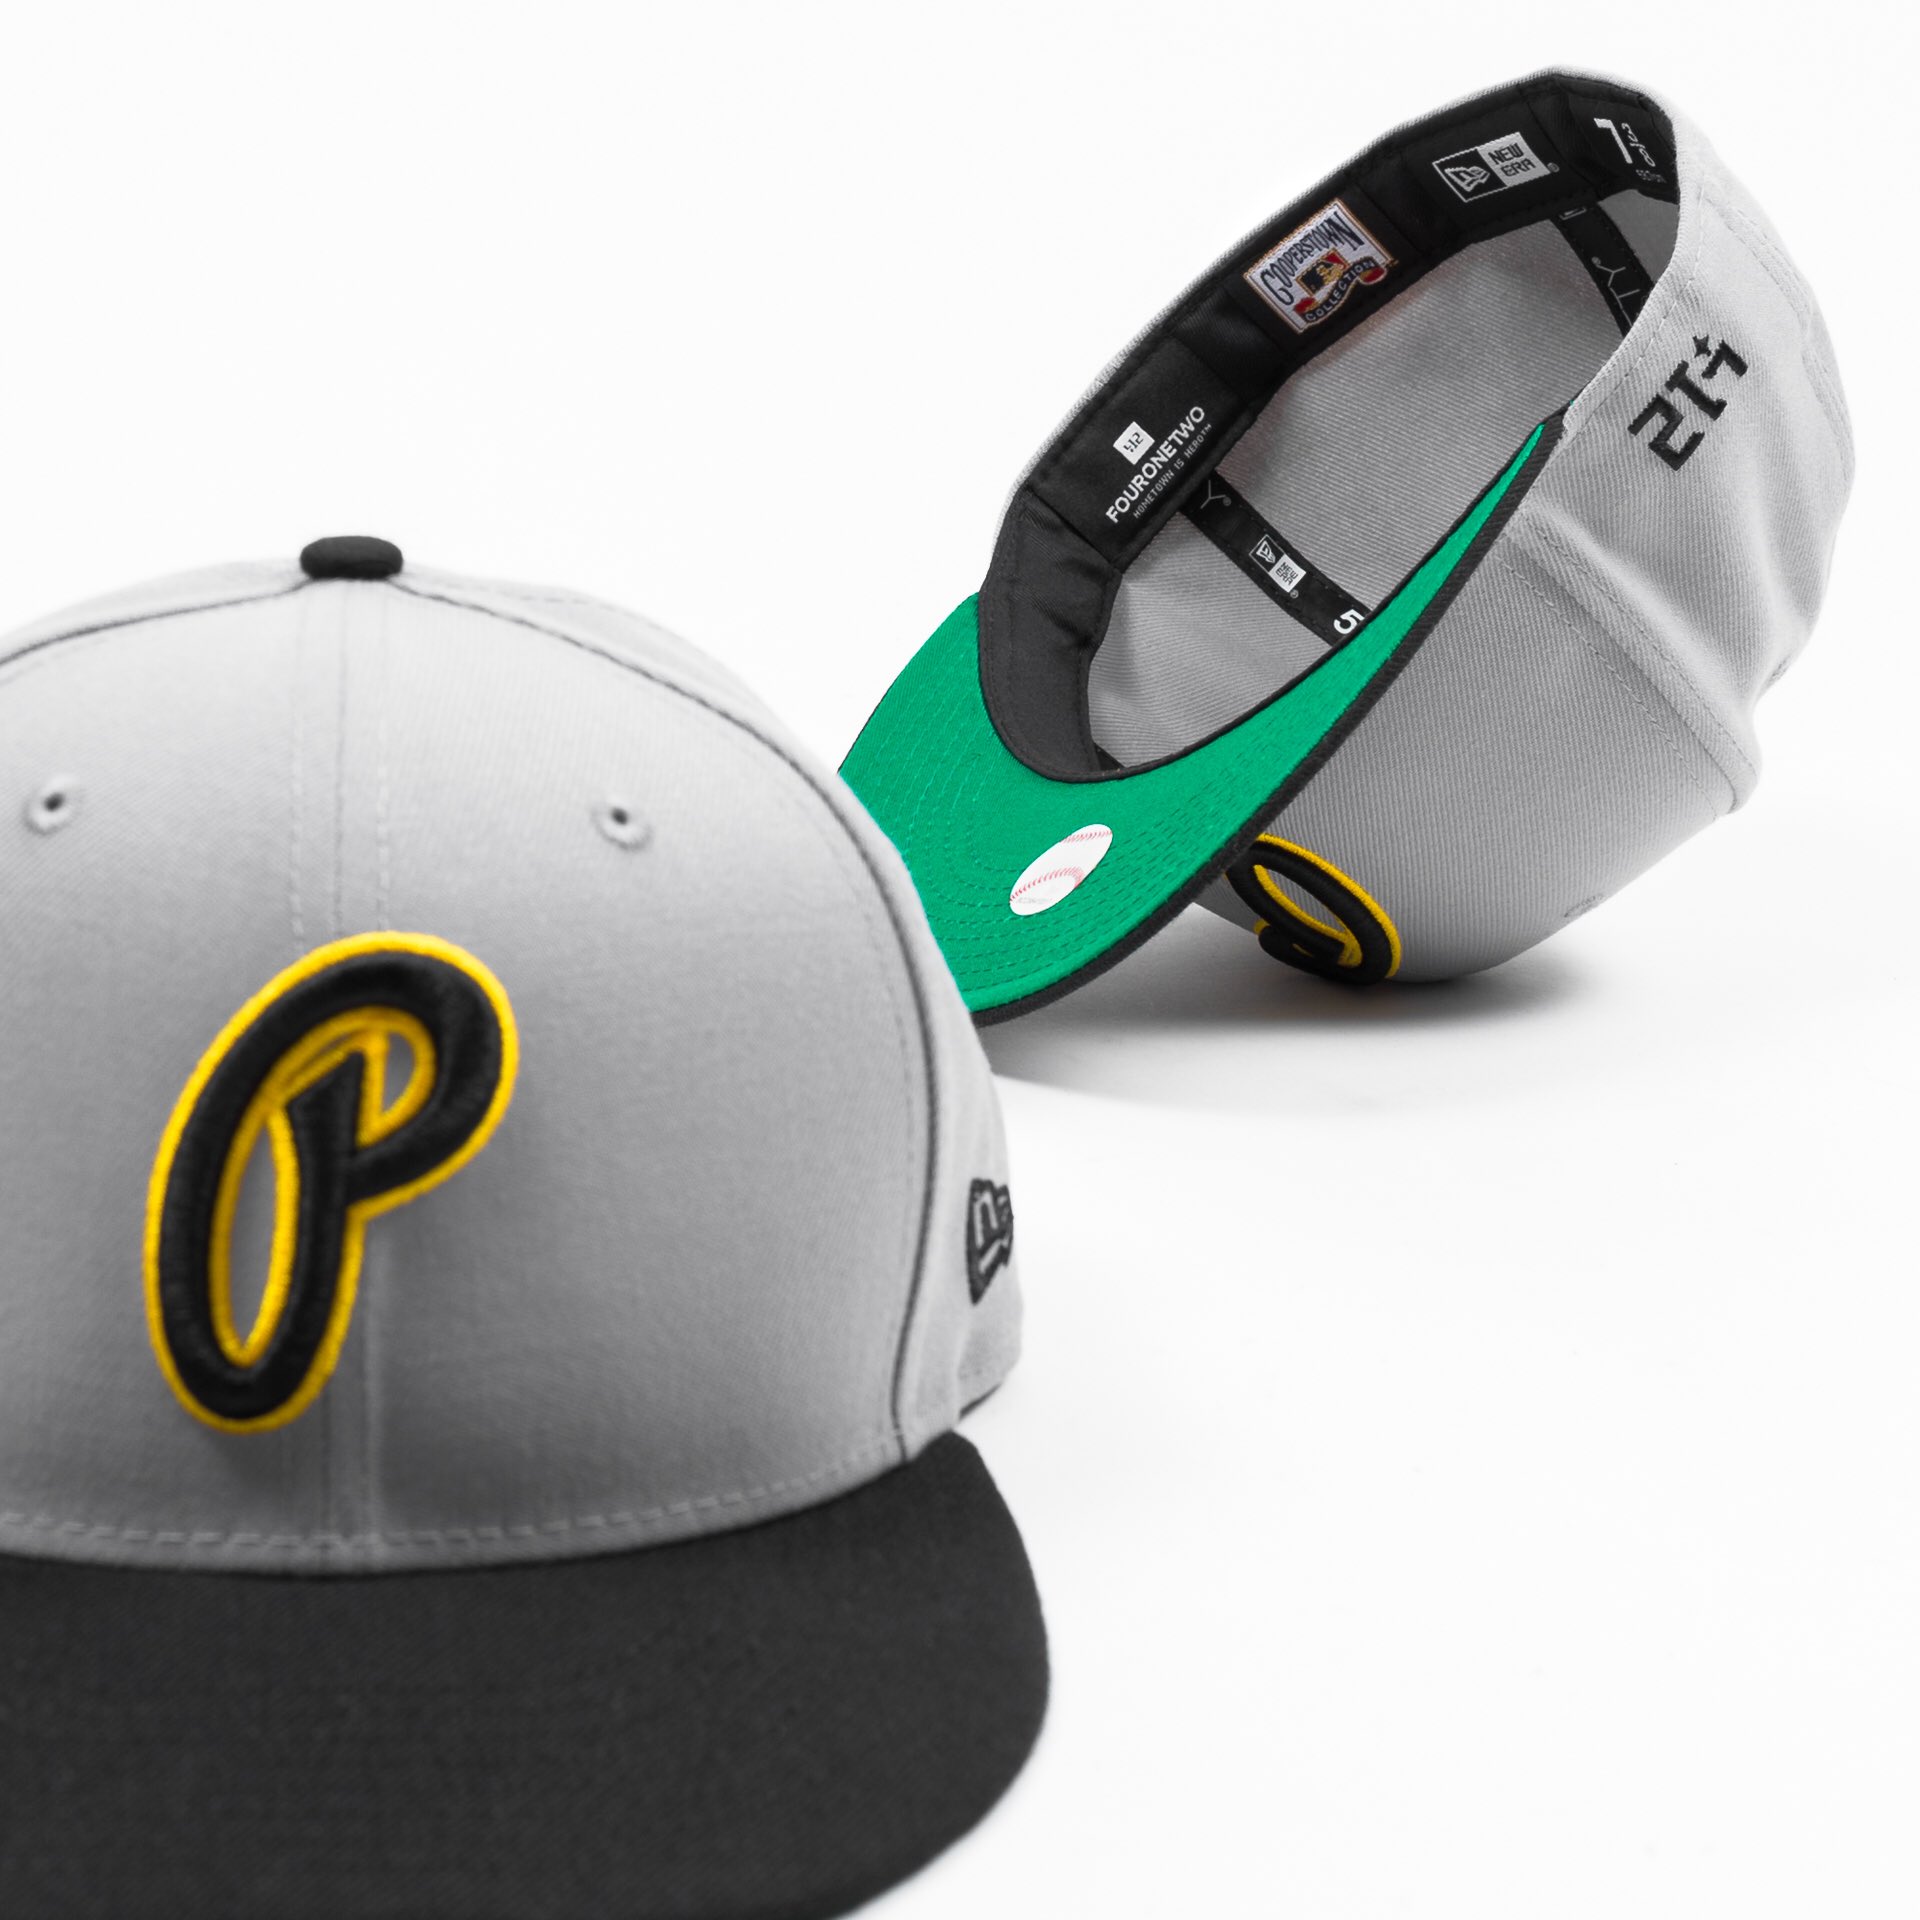 Distribute malt liberal 412 on Twitter: "The 412 x New Era x Pittsburgh Pirates Season 2 capsule  collection is now available online—exclusively at https://t.co/0RaQRV5otT  (while supplies last). #412xPirates #412xNewEra https://t.co/uJ4QK81jZr" /  Twitter